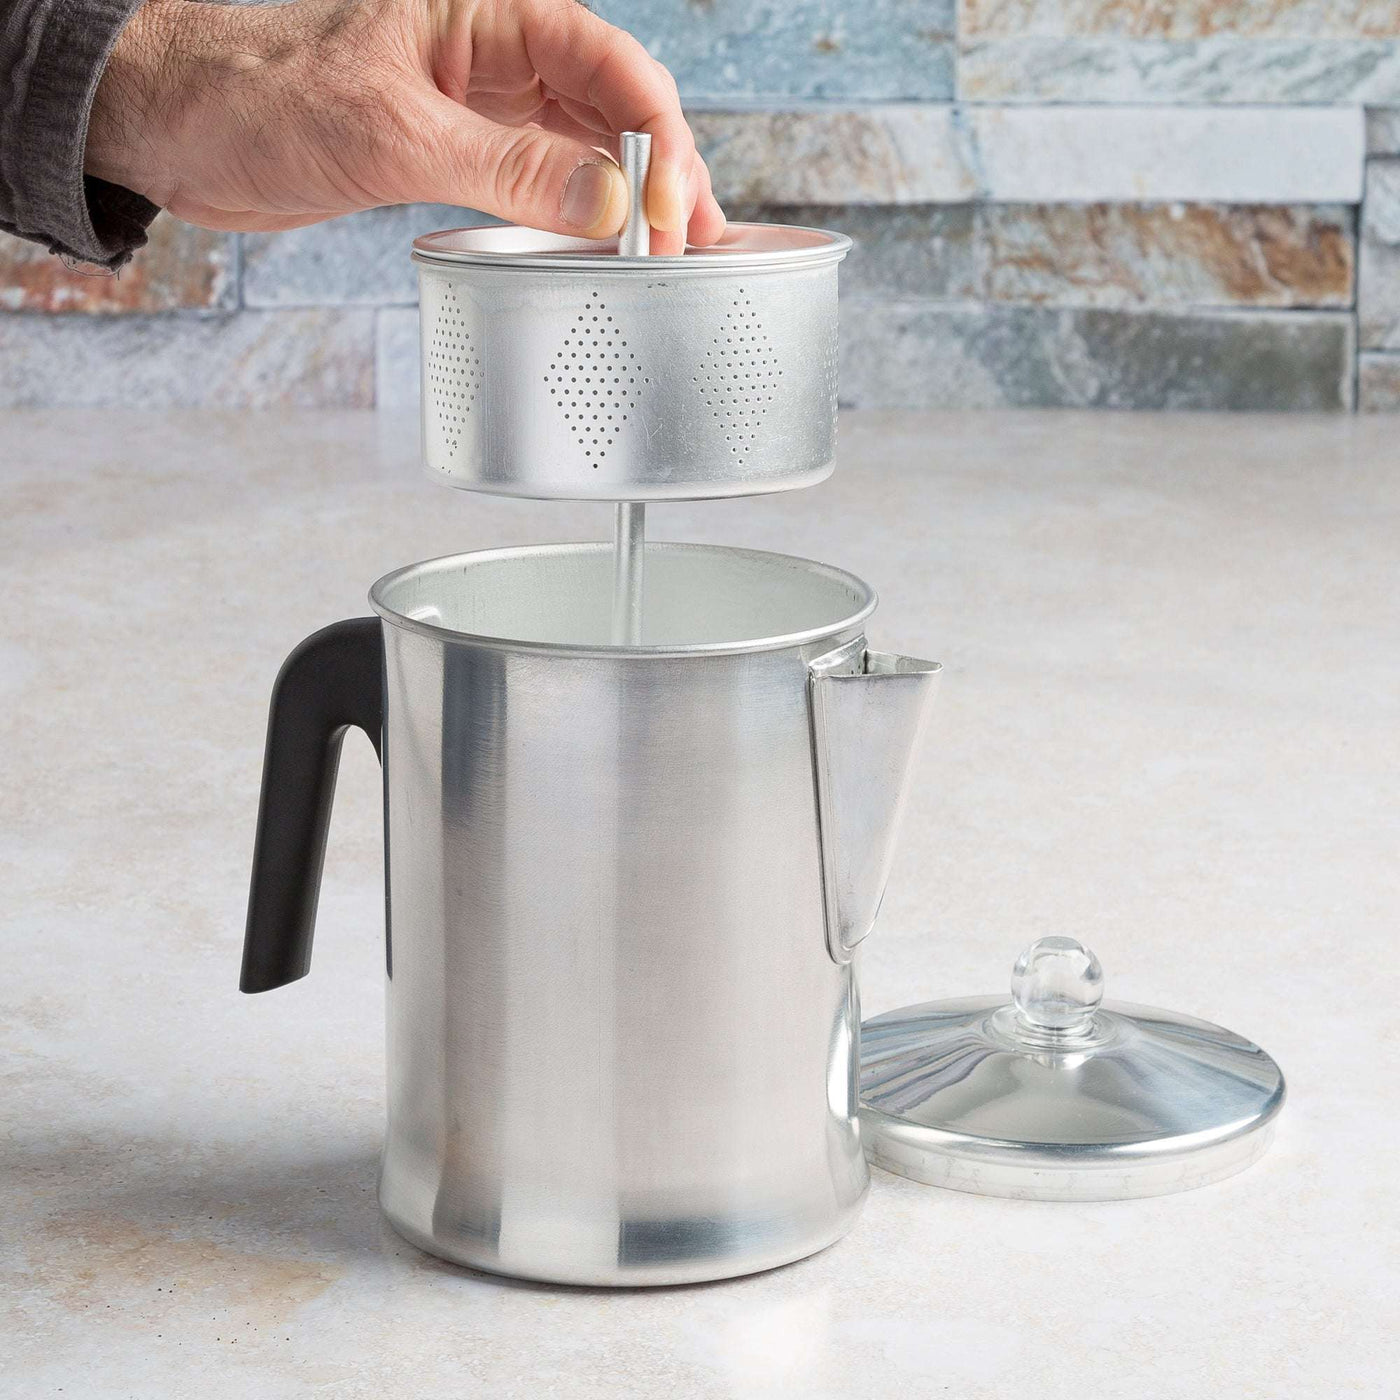 Elite Platinum Stainless Steel 12-Cup Percolator, 1 ct - Dillons